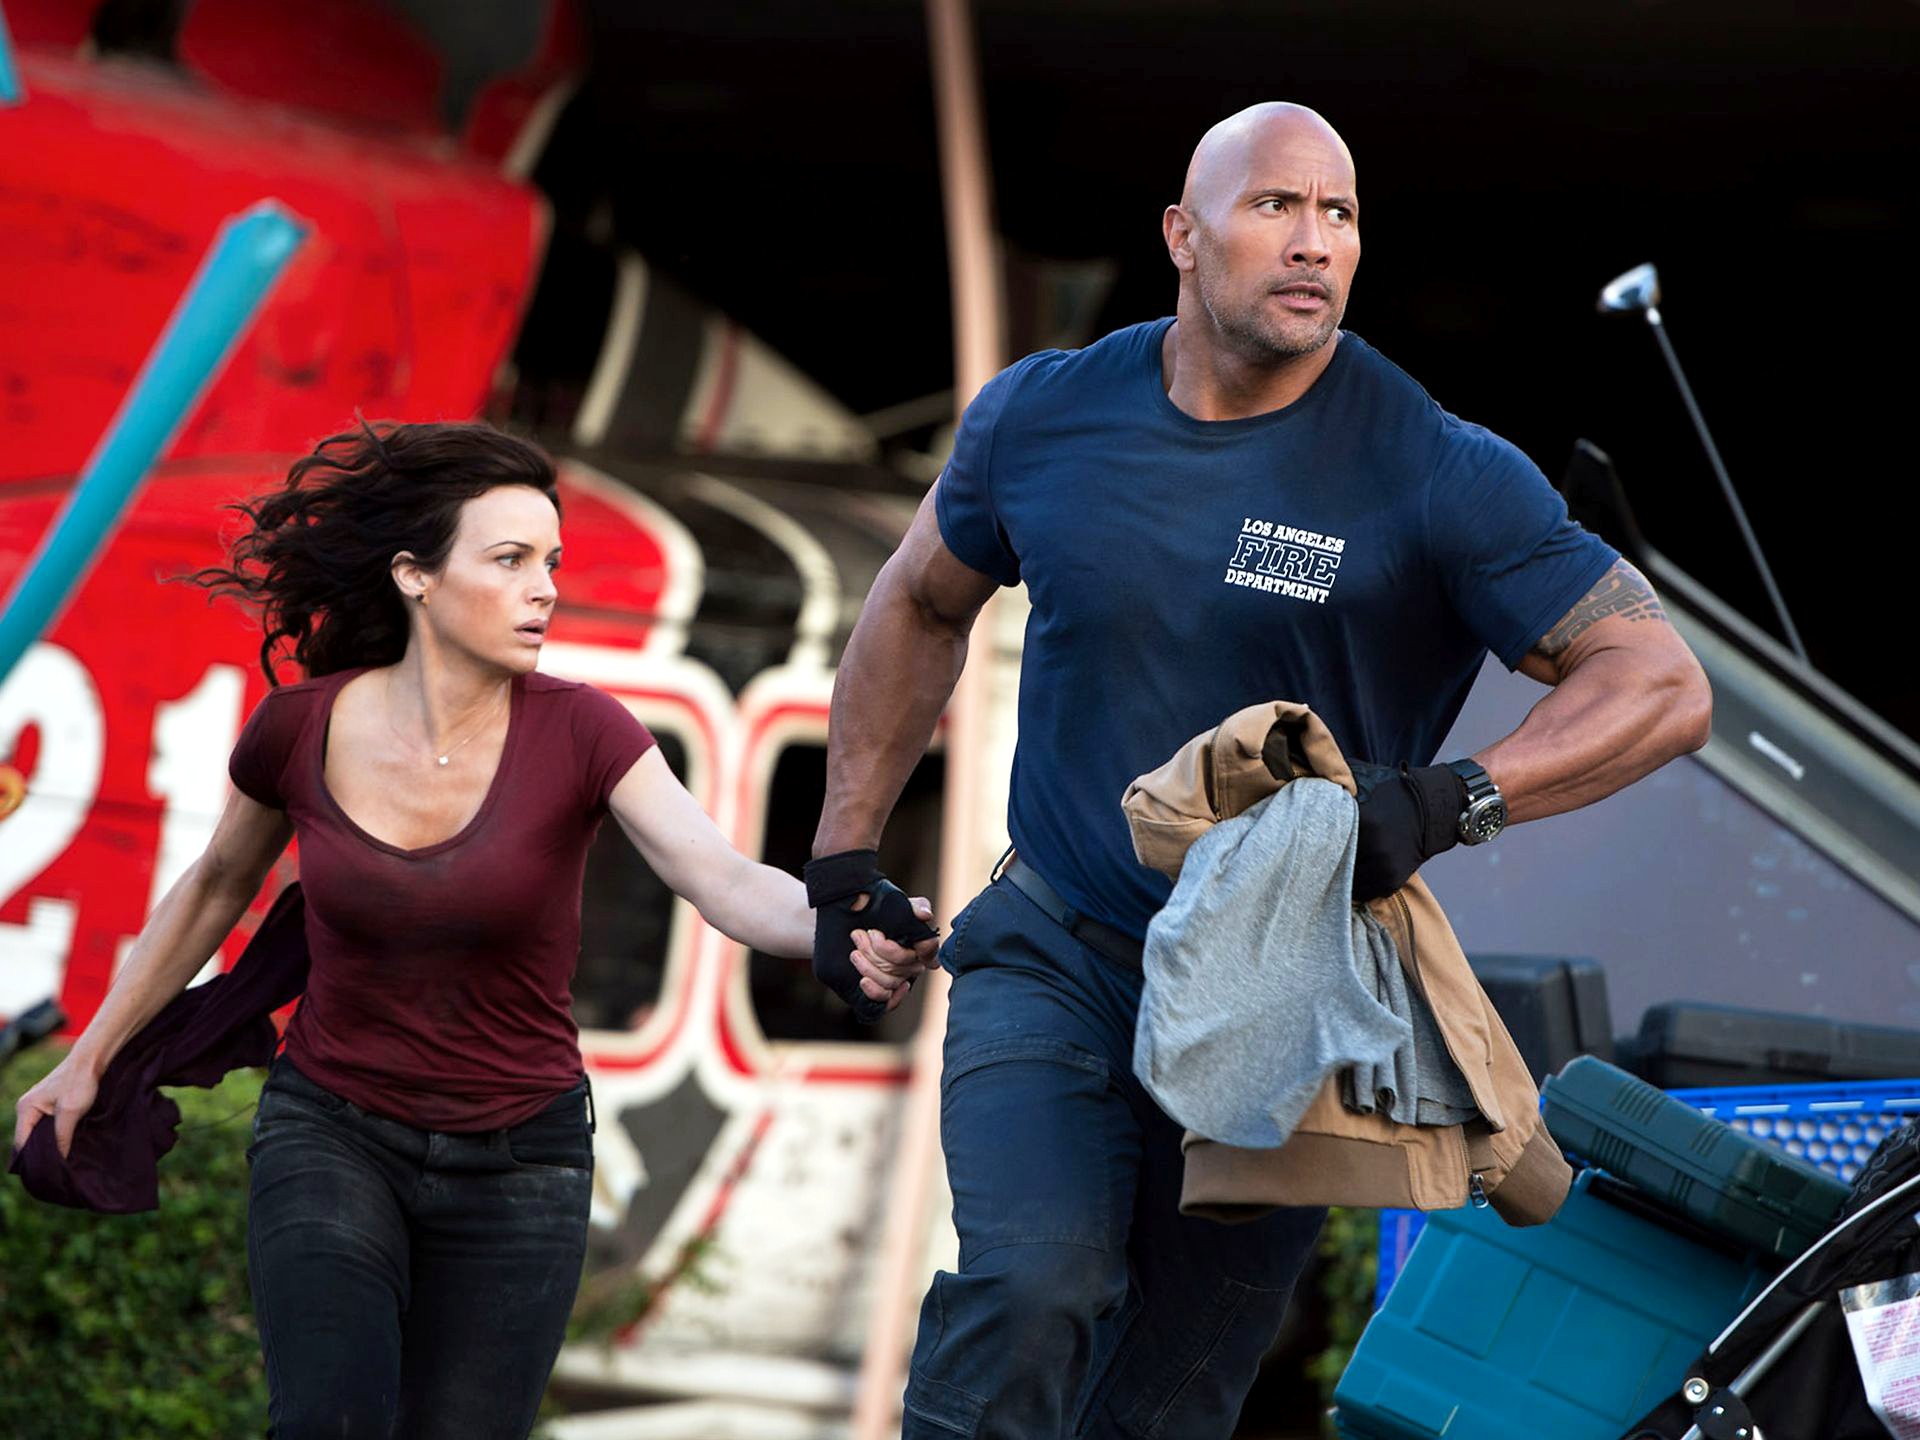 Carla Gugino stars as Emma and The Rock stars as Ray in Warner Bros. Pictures' San Andreas (2015). Photo credit by Jasin Boland.